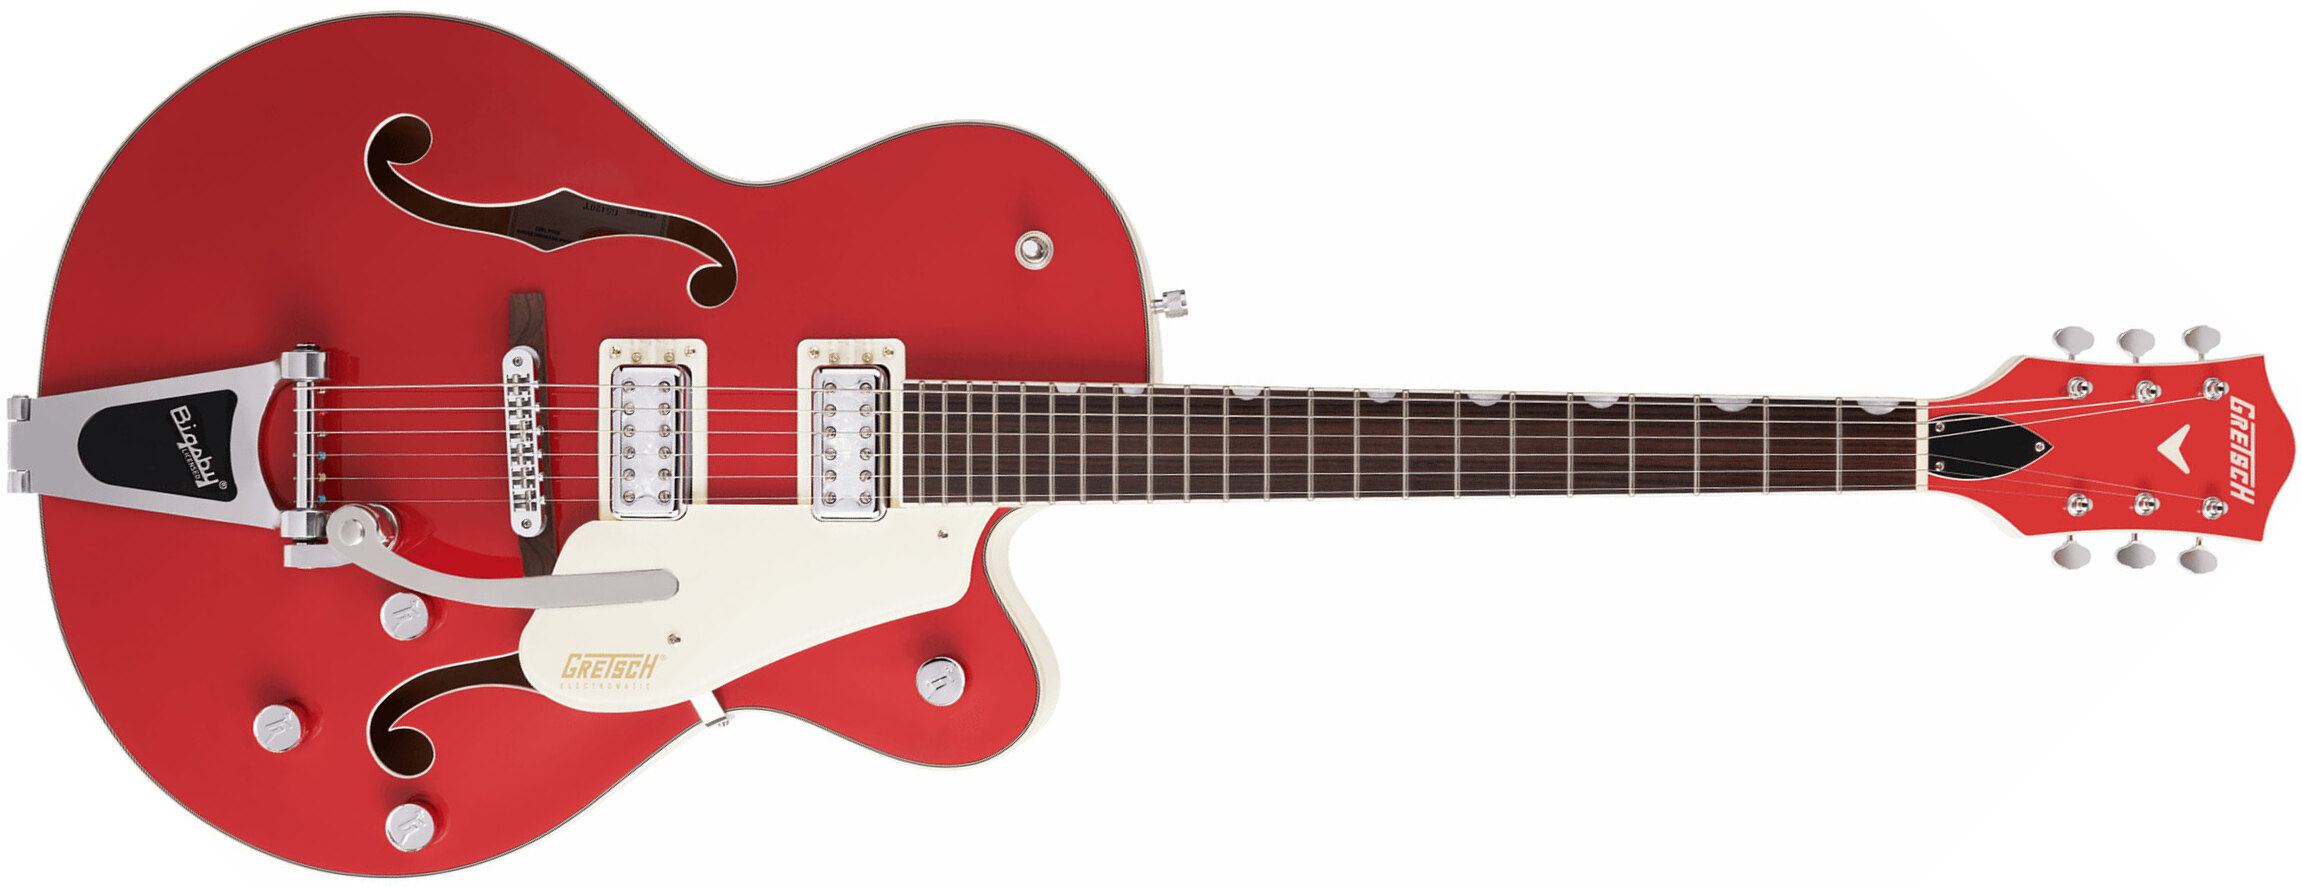 Gretsch G5410t Tri-five Electromatic Hollow Hh Bigsby Rw - 2-tone Fiesta Red On Vintage White - Guitare Électrique 1/2 Caisse - Main picture